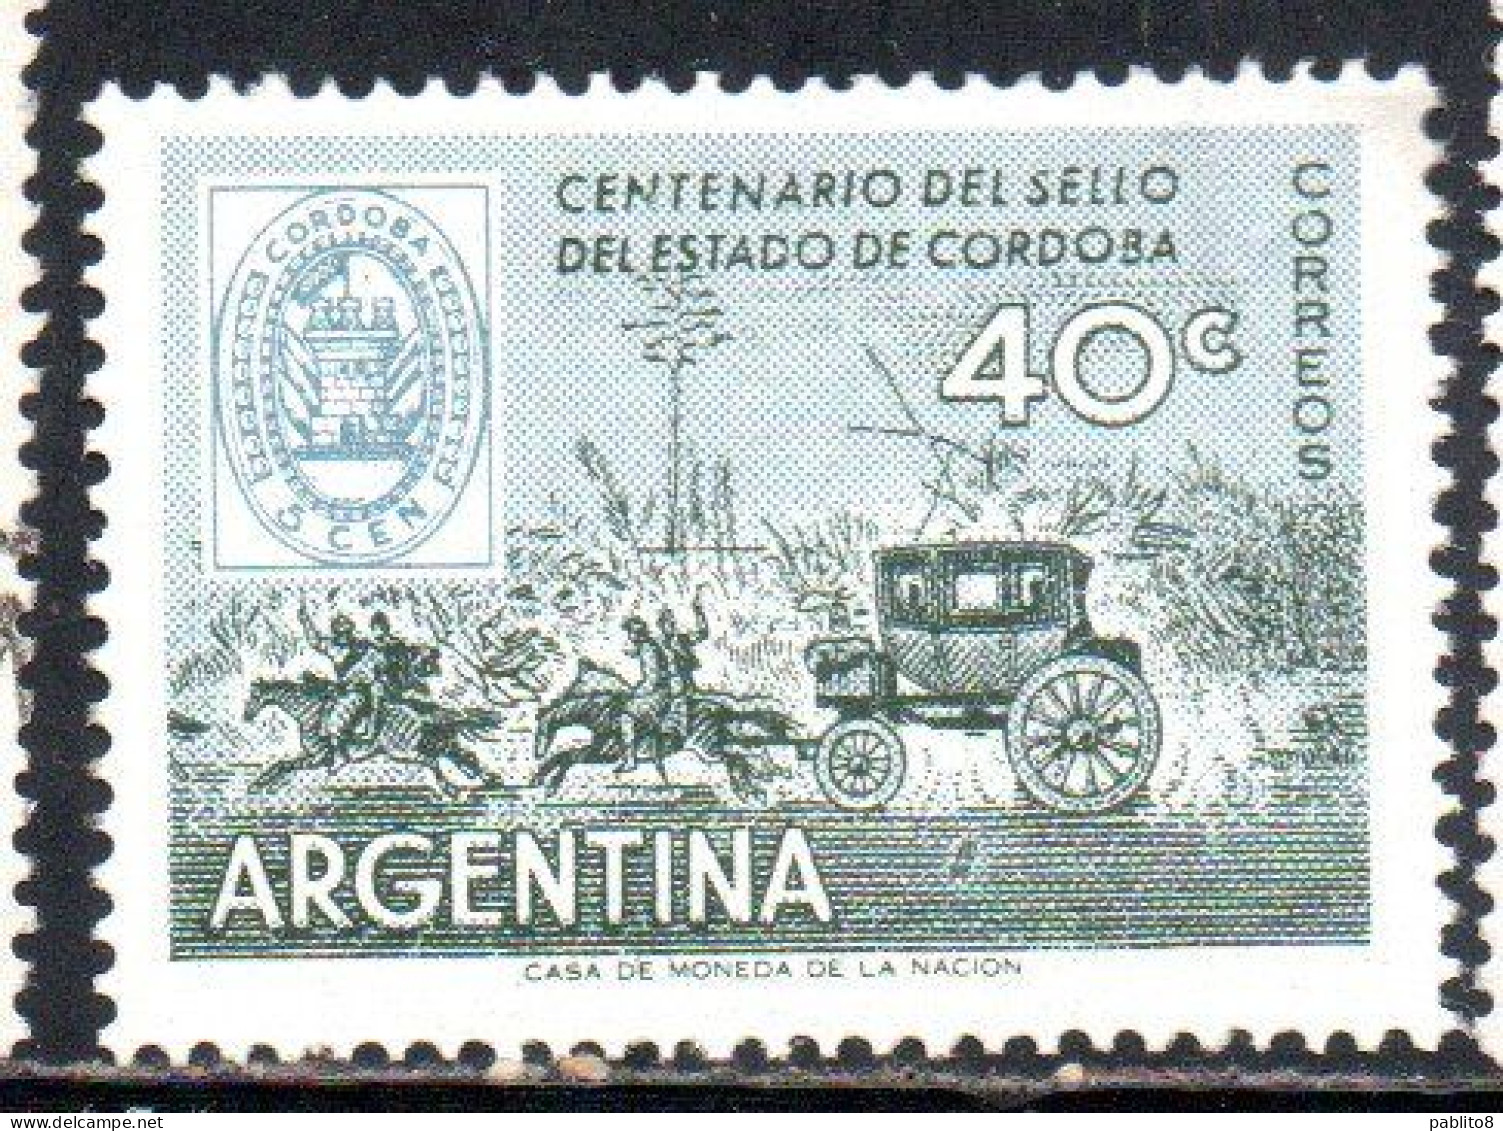 ARGENTINA 1958 CENTENARY OF CORDOBA POSTAGE STAMPS STAMP AND MAIL COACH 40c MNH - Neufs